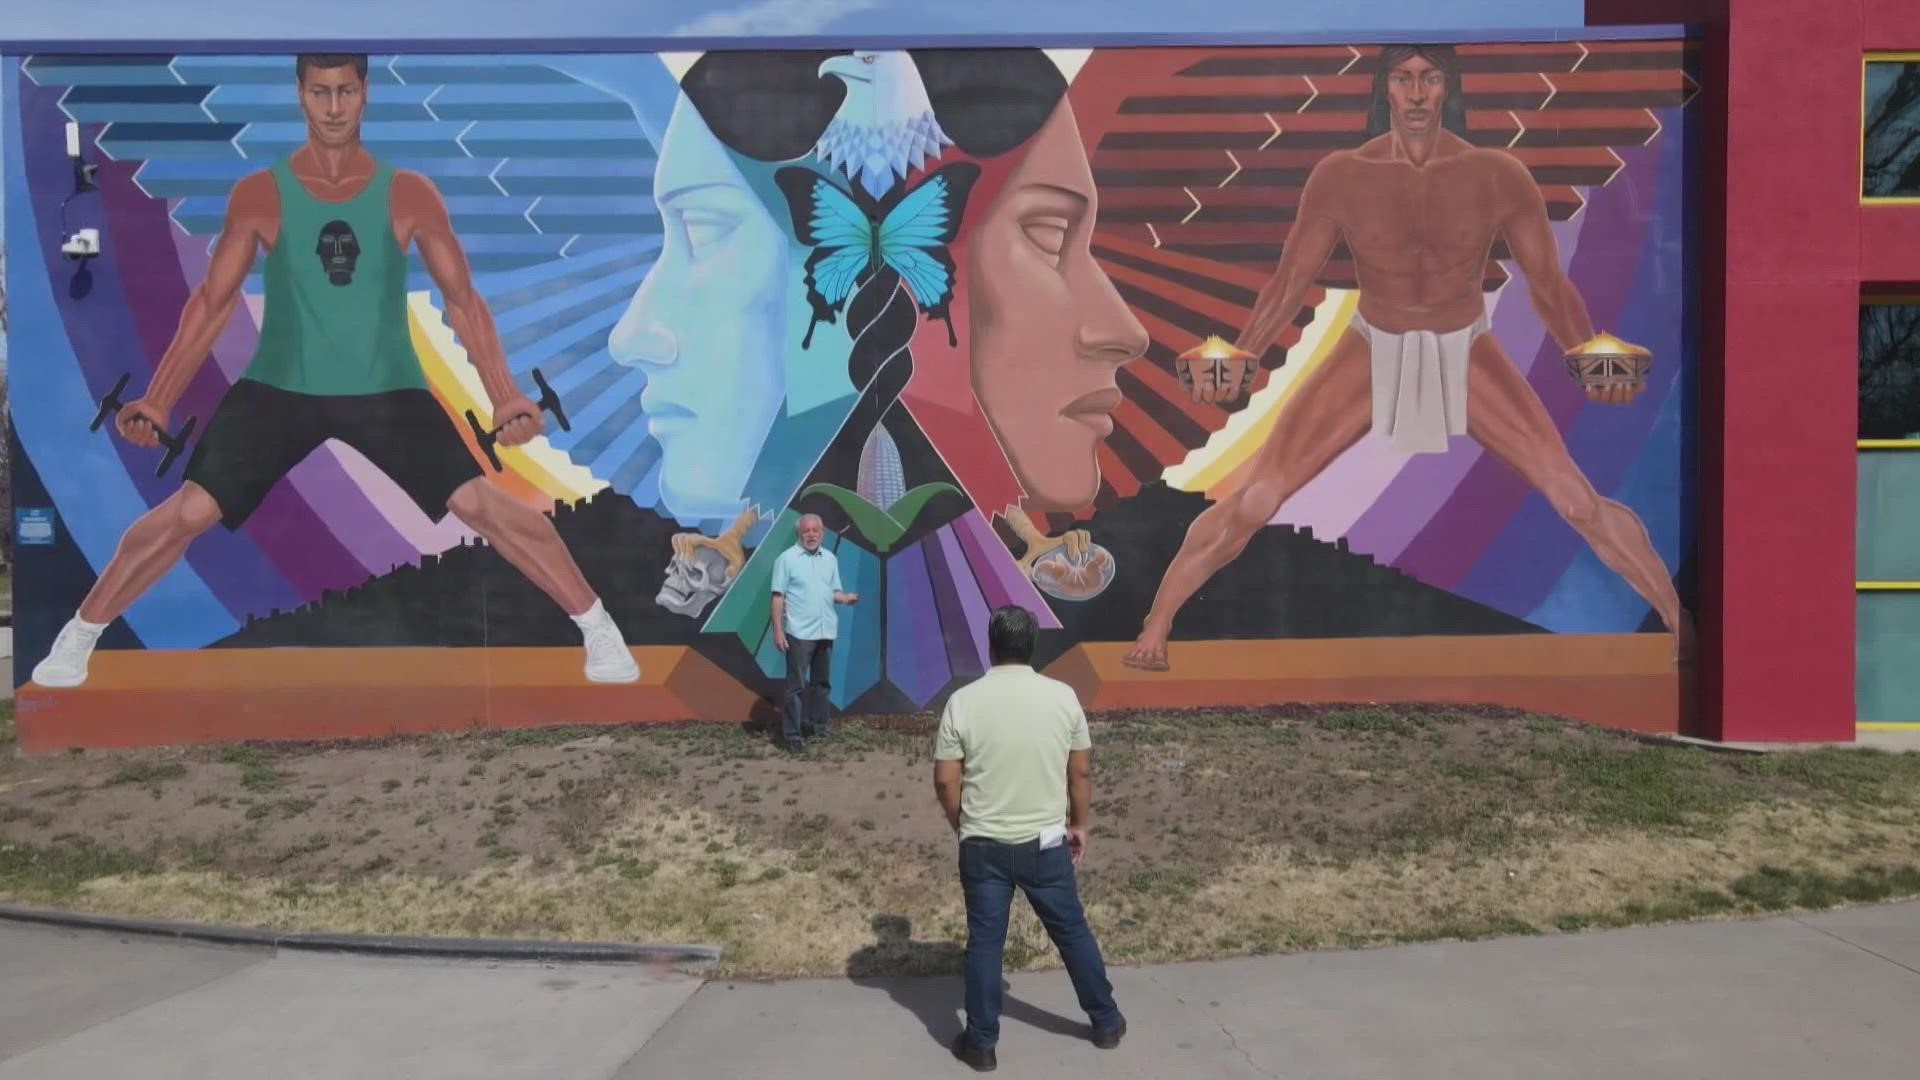 The National Trust for Historic Preservation announced Chicano/a Community Murals of Colorado as one of America's 11 Most Endangered Historic Places of 2022.